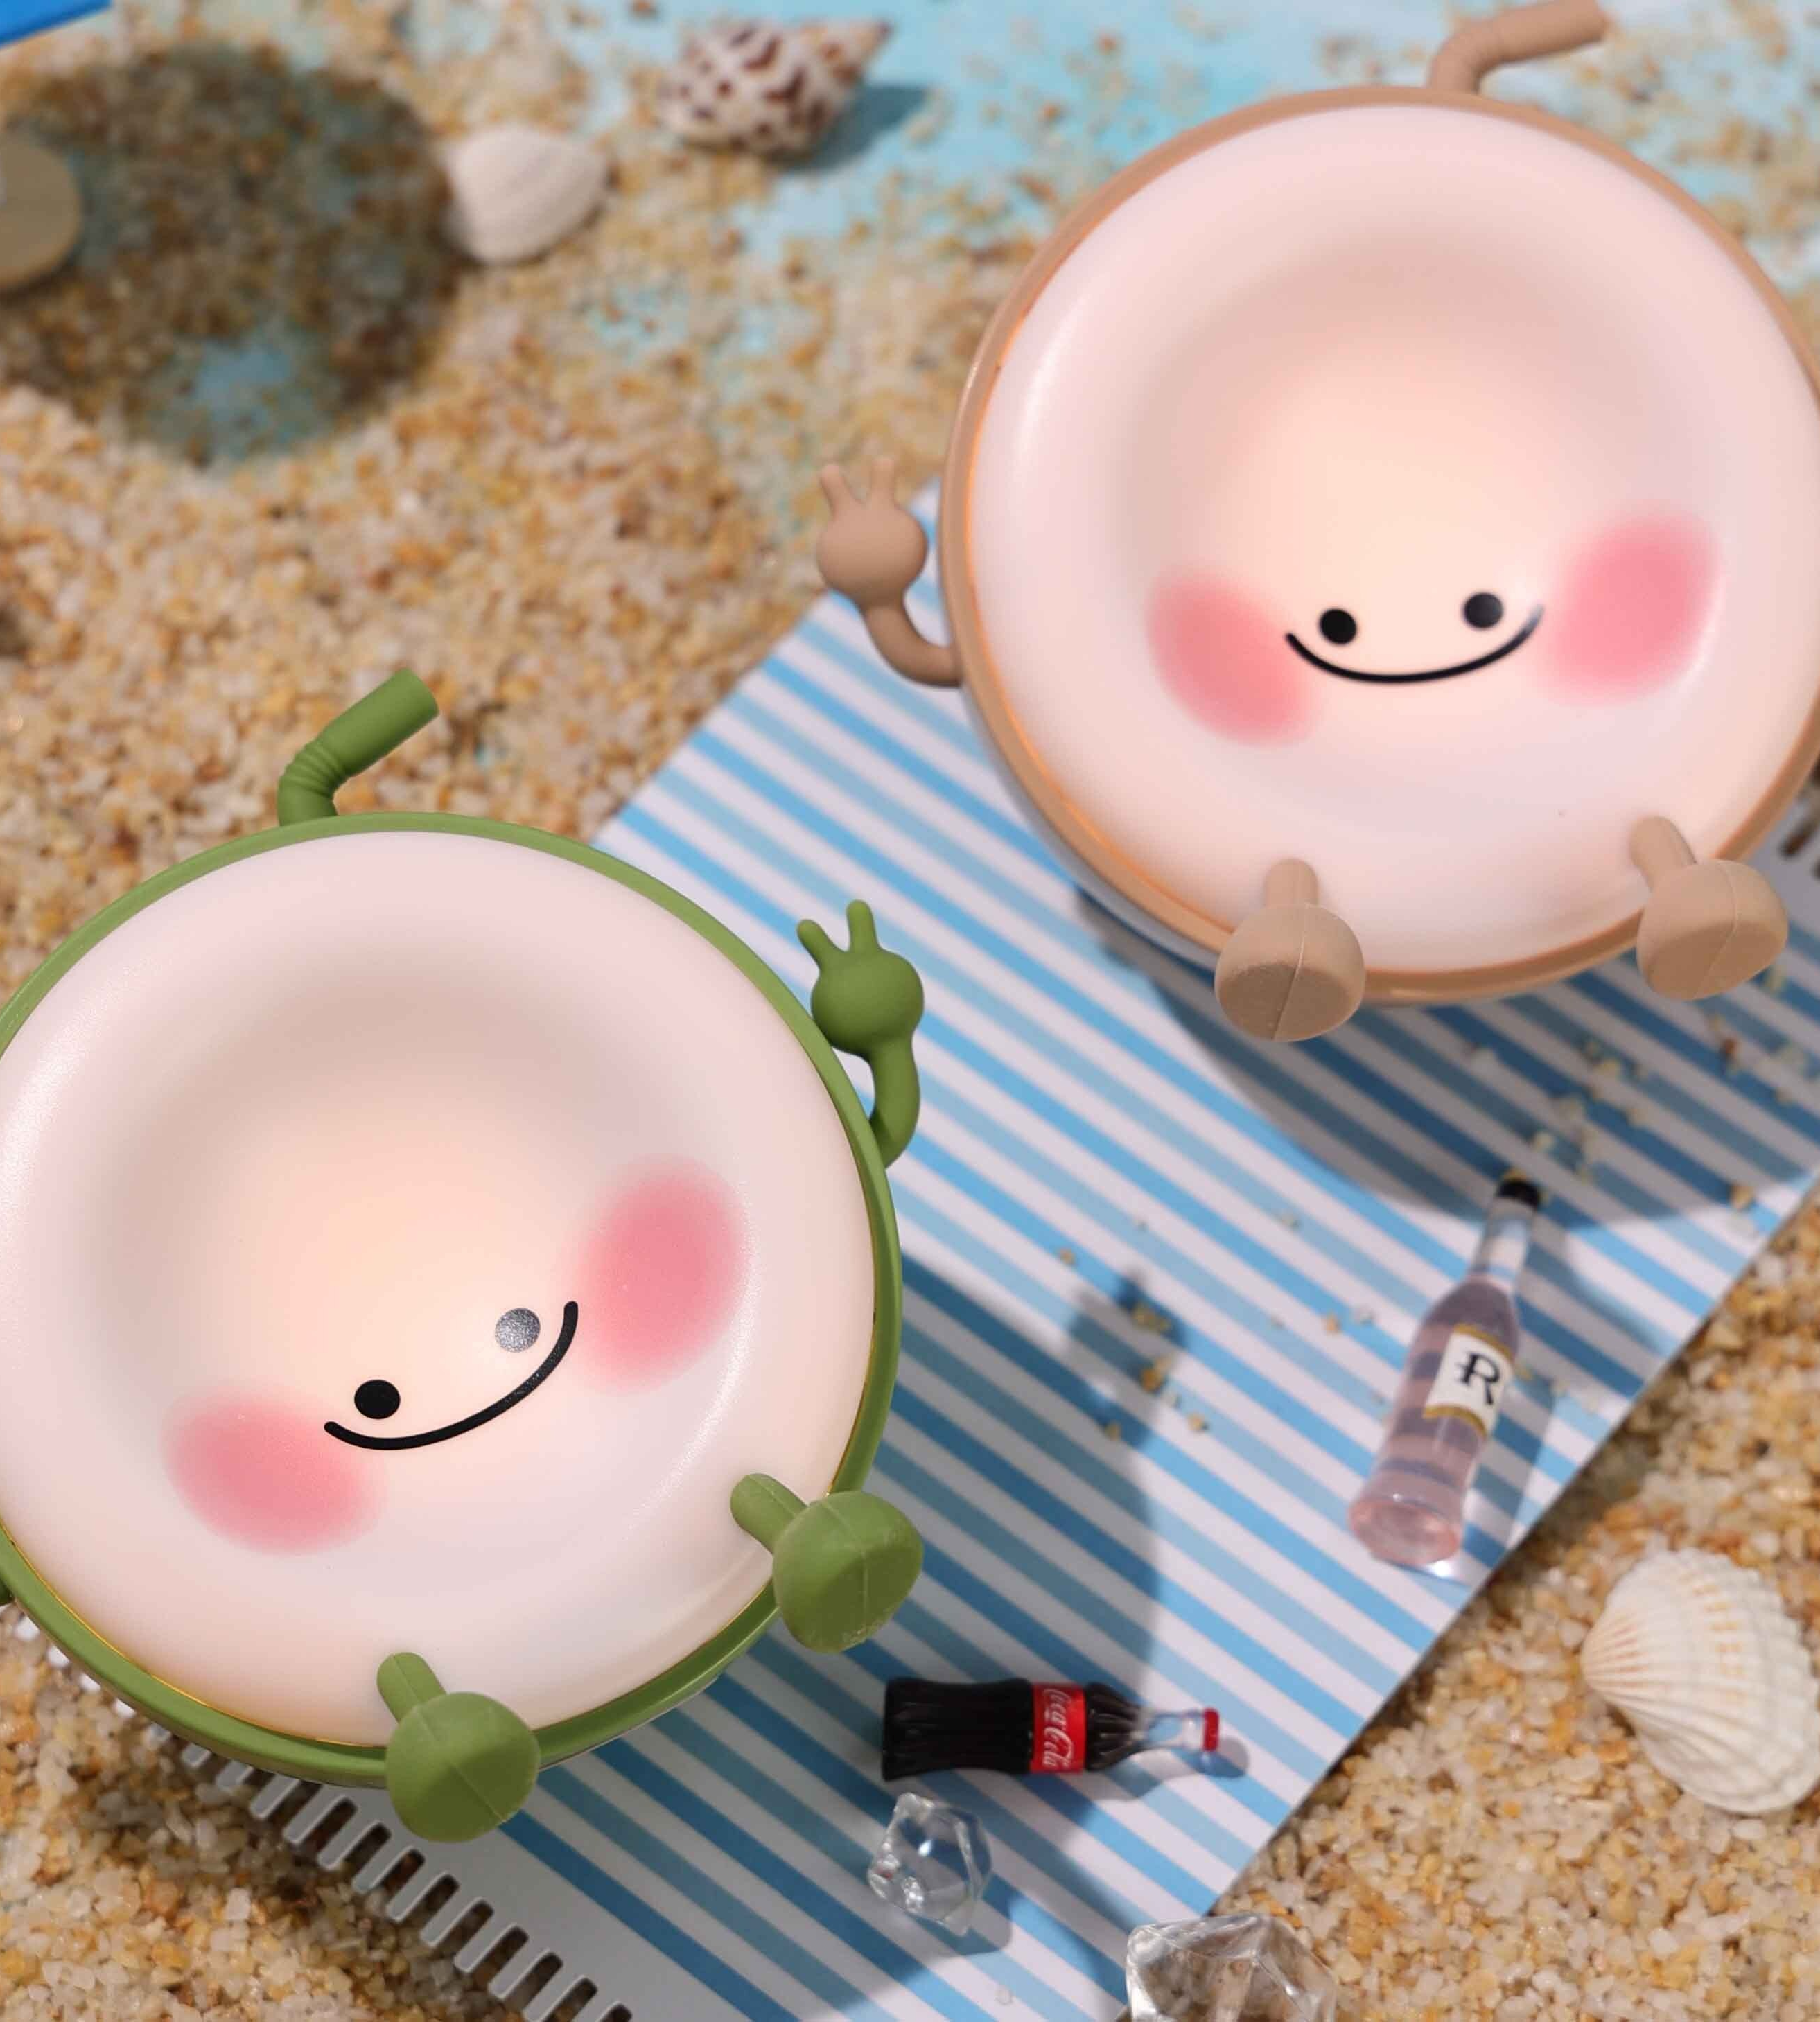 Transform Any Space into a Cozy Oasis with Cute Night Lights